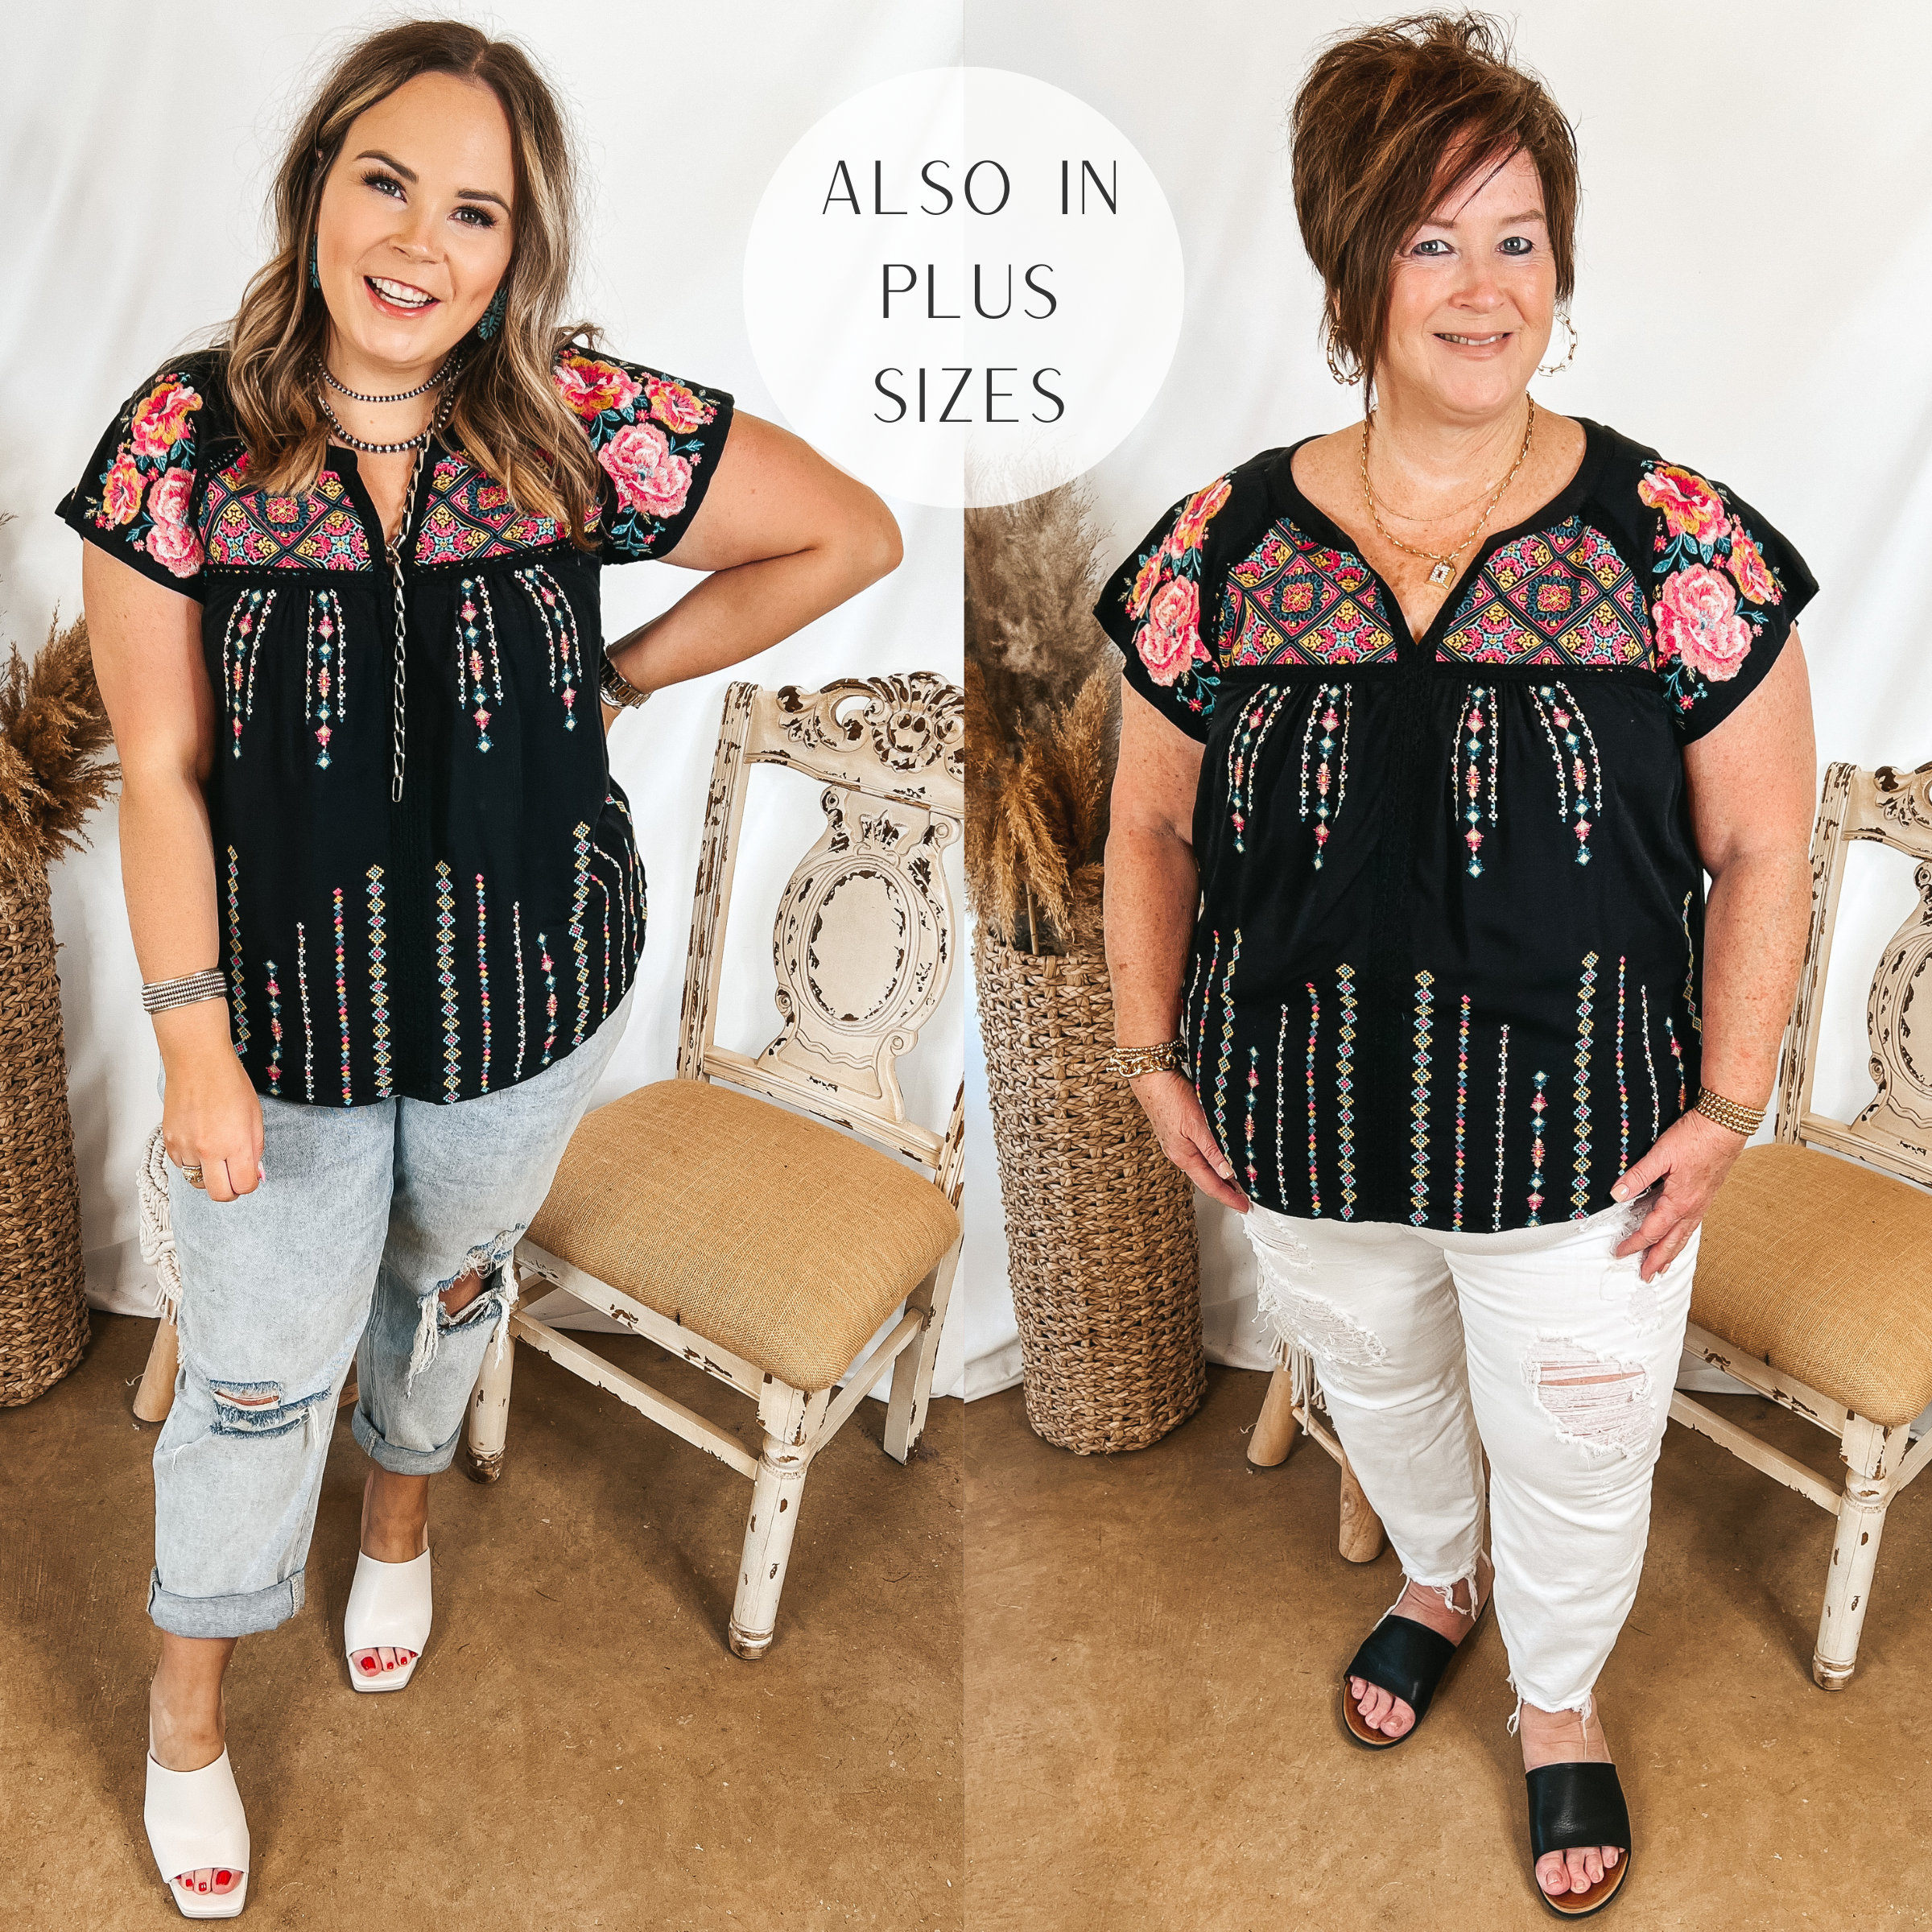 Models are wearing a black top with a notched v neck, short sleeves, and embroidery all over the front. Size large model has it paired with light wash boyfriend jeans, white heels, and silver jewelry. Plus size model has it paired with white distressed jeans, black sandals, and gold jewelry.